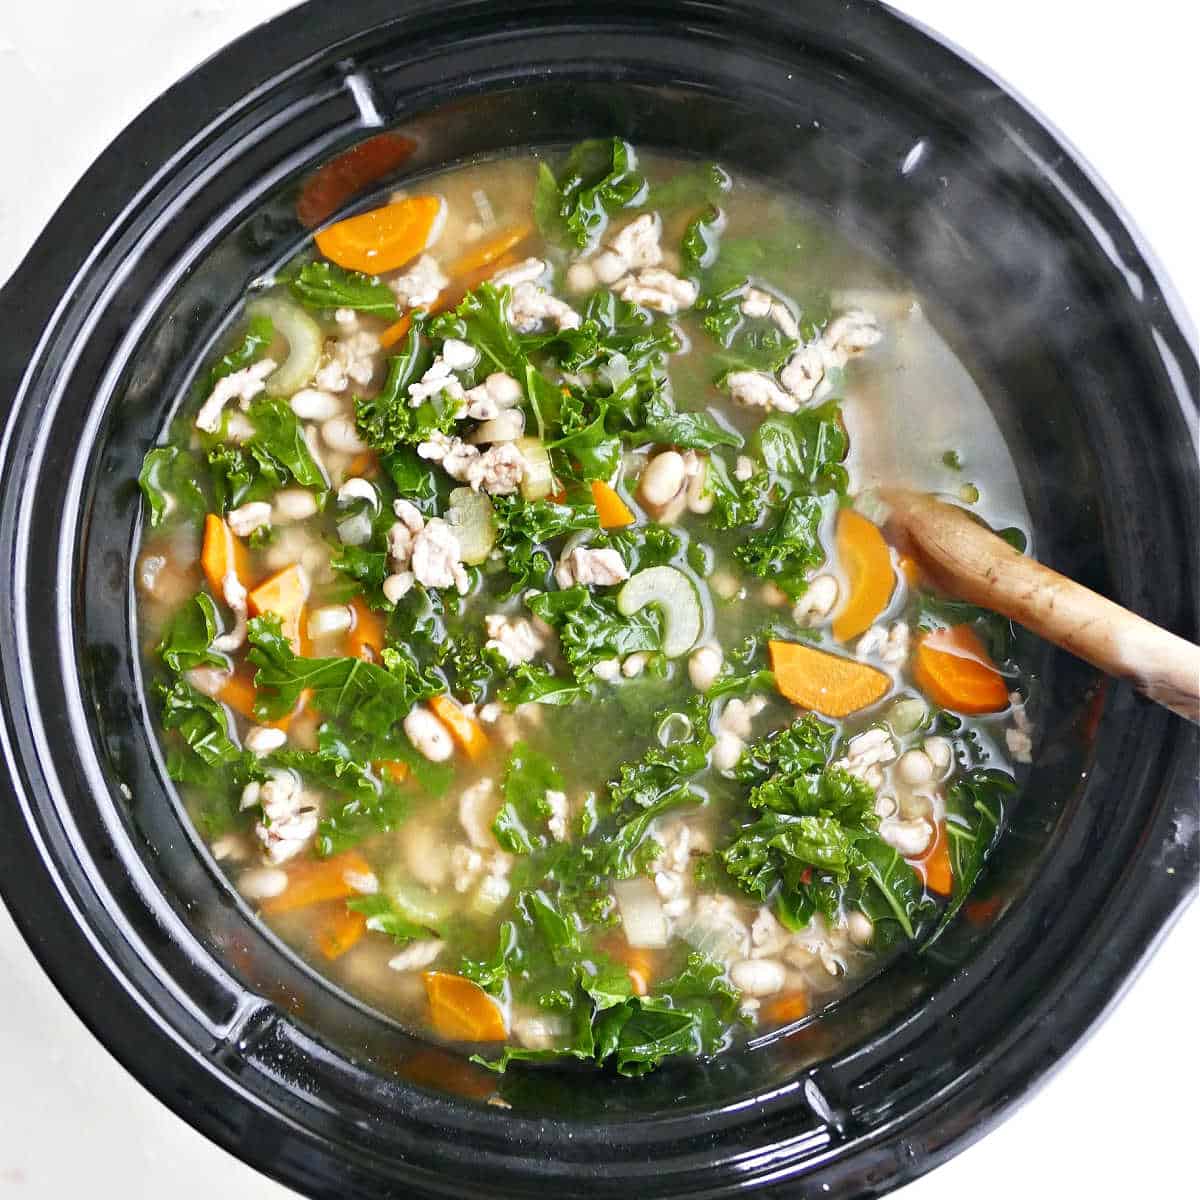 kale being mixed into soup in the slow cooker